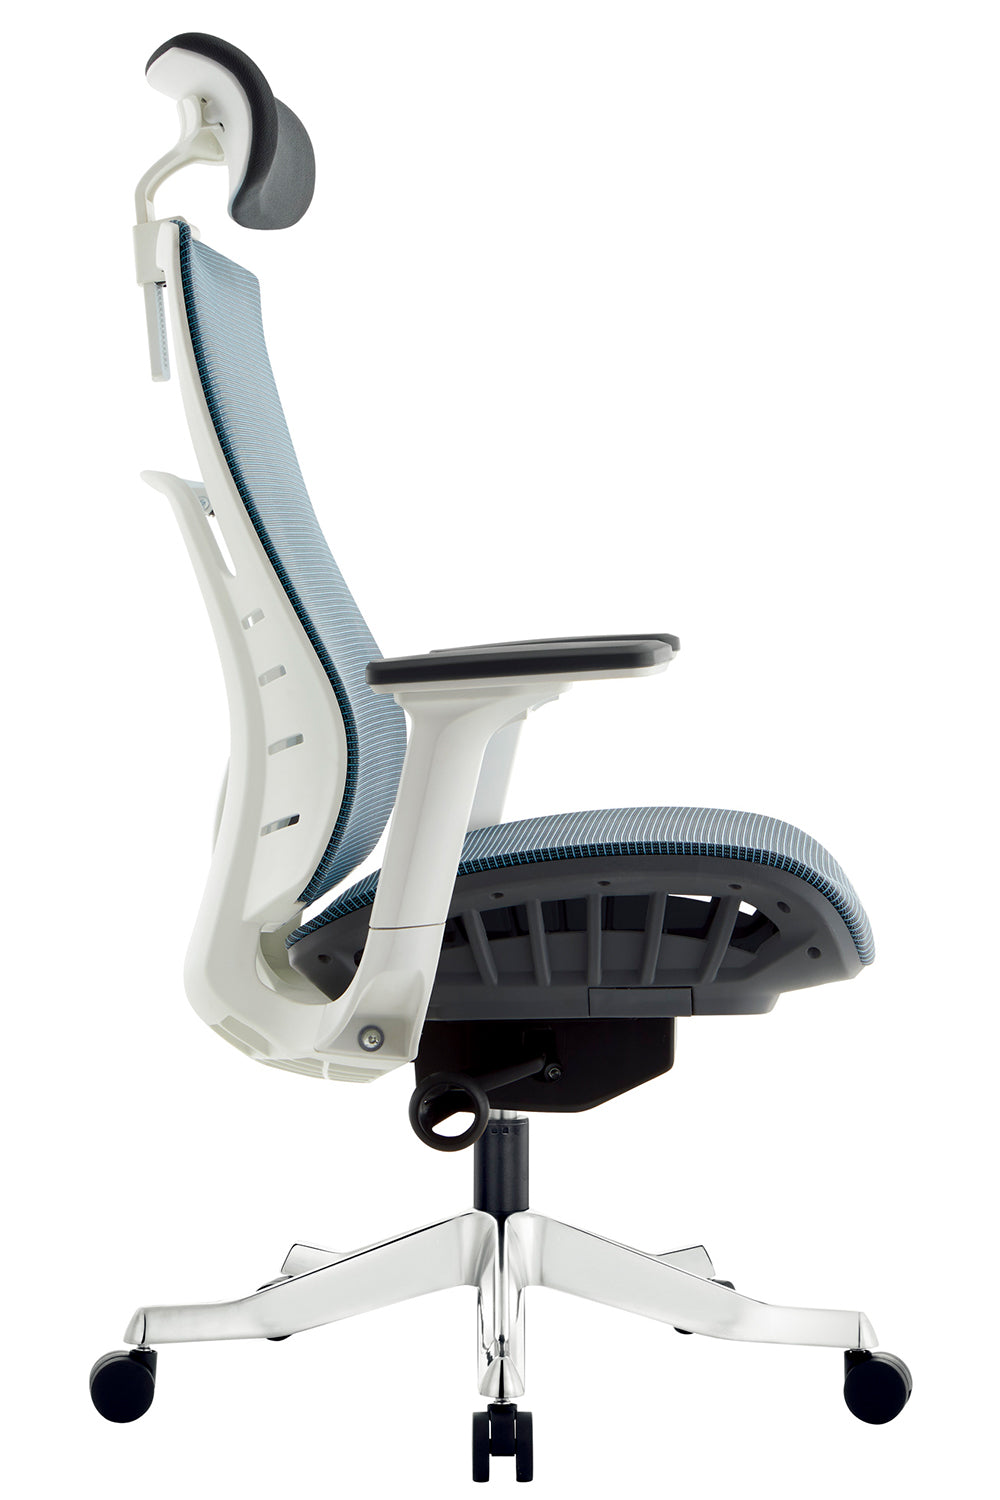 Apollo High Back 3D Workstation Swivel Chair with Mesh Seat And Aluminum die cast Base  - White